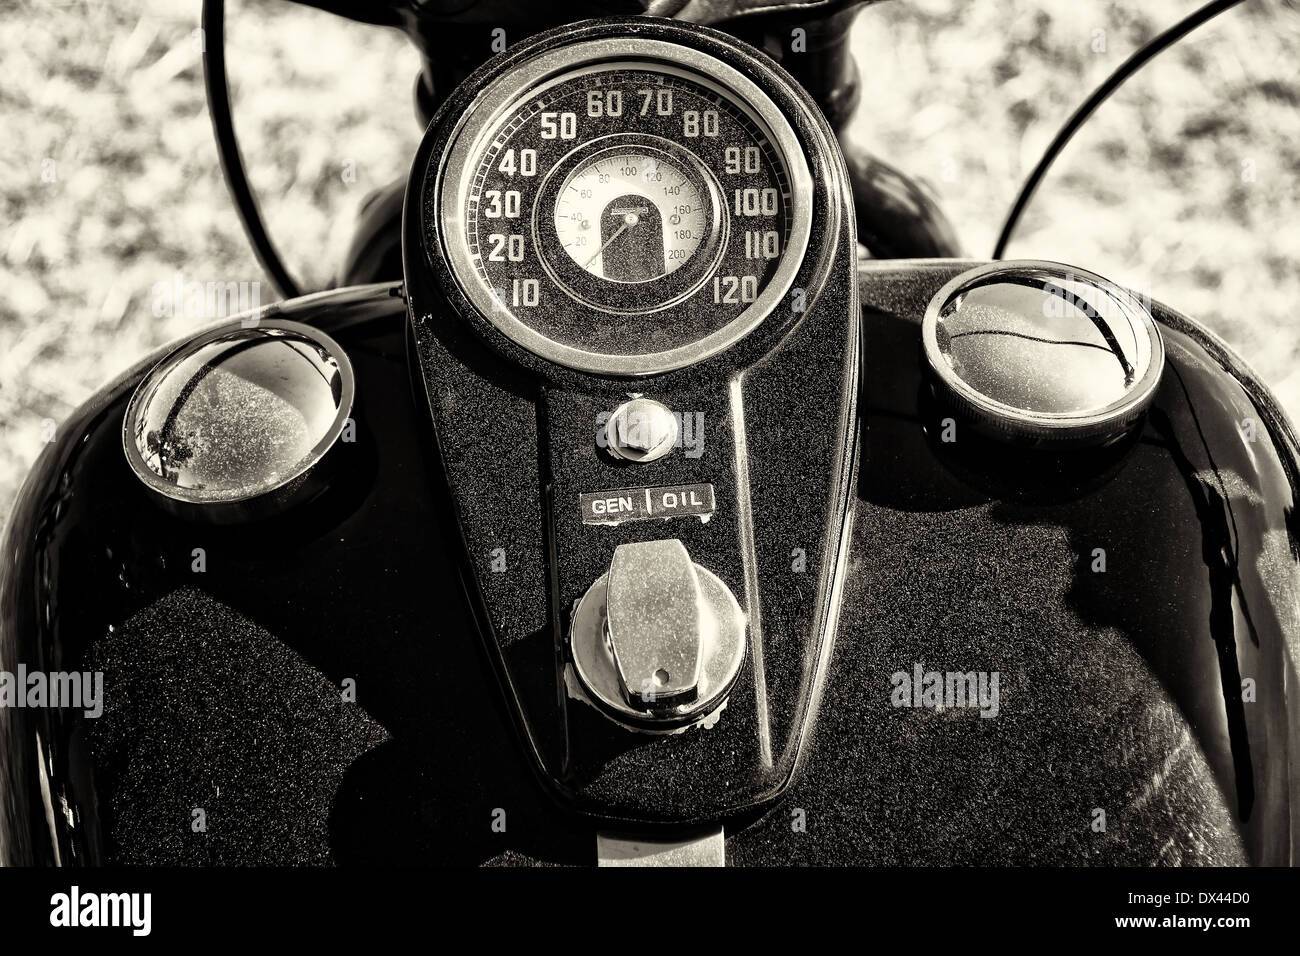 The dashboard and fuel tank motorcycle Harley Davidson, black and white Stock Photo